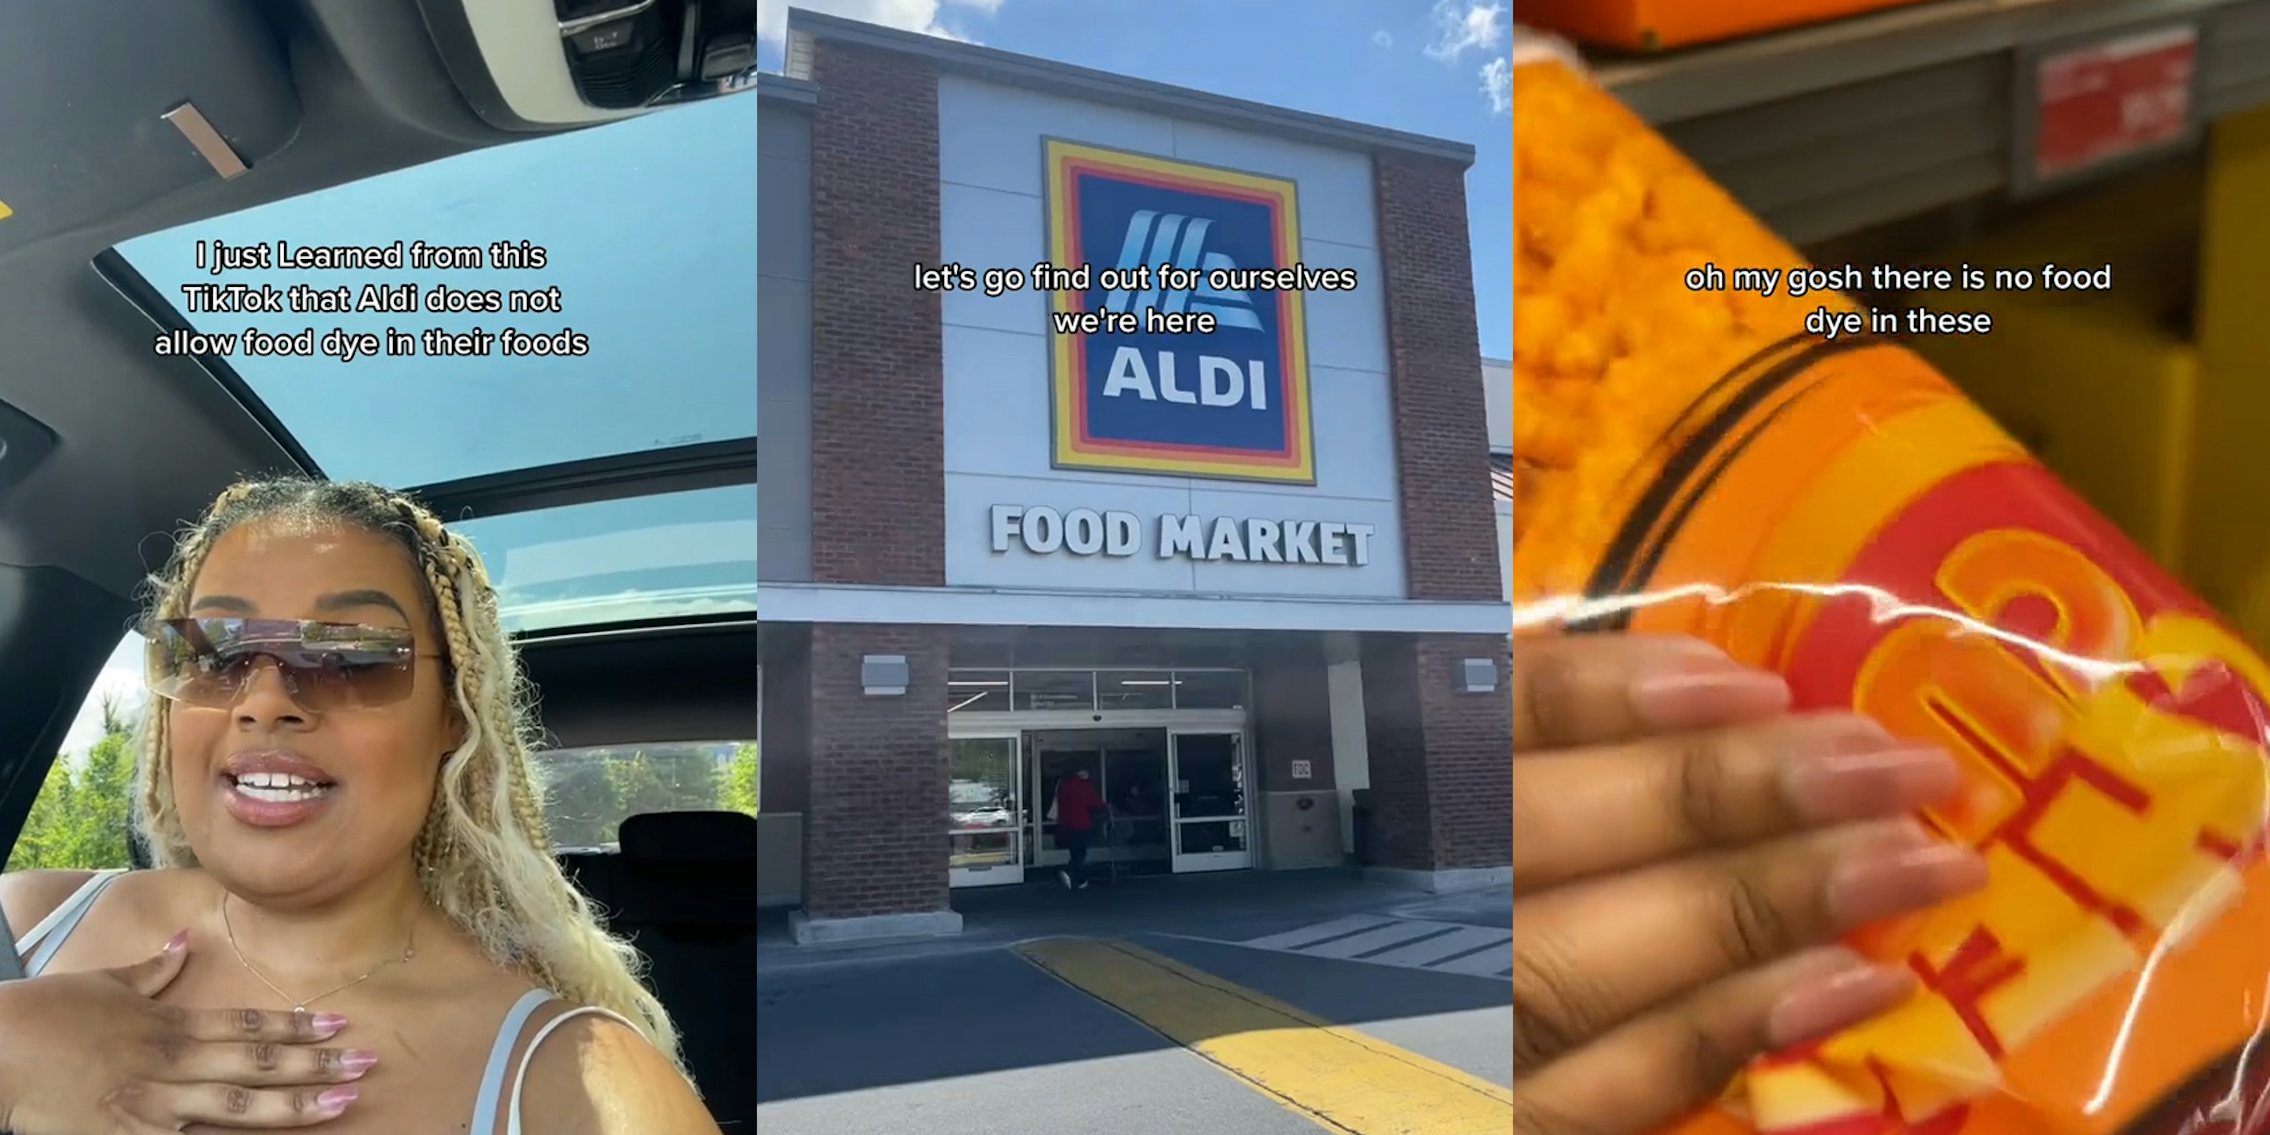 person speaking in car with hand on chest with caption 'I just learned from this TikTok that Aldi does not allow food dye in their foods' (l) Aldi building with sign with caption 'let's go find out for ourselves we're here' (c) hand holding Aldi's brand cheetos with caption 'oh my gosh there is no food dye in these' (r)